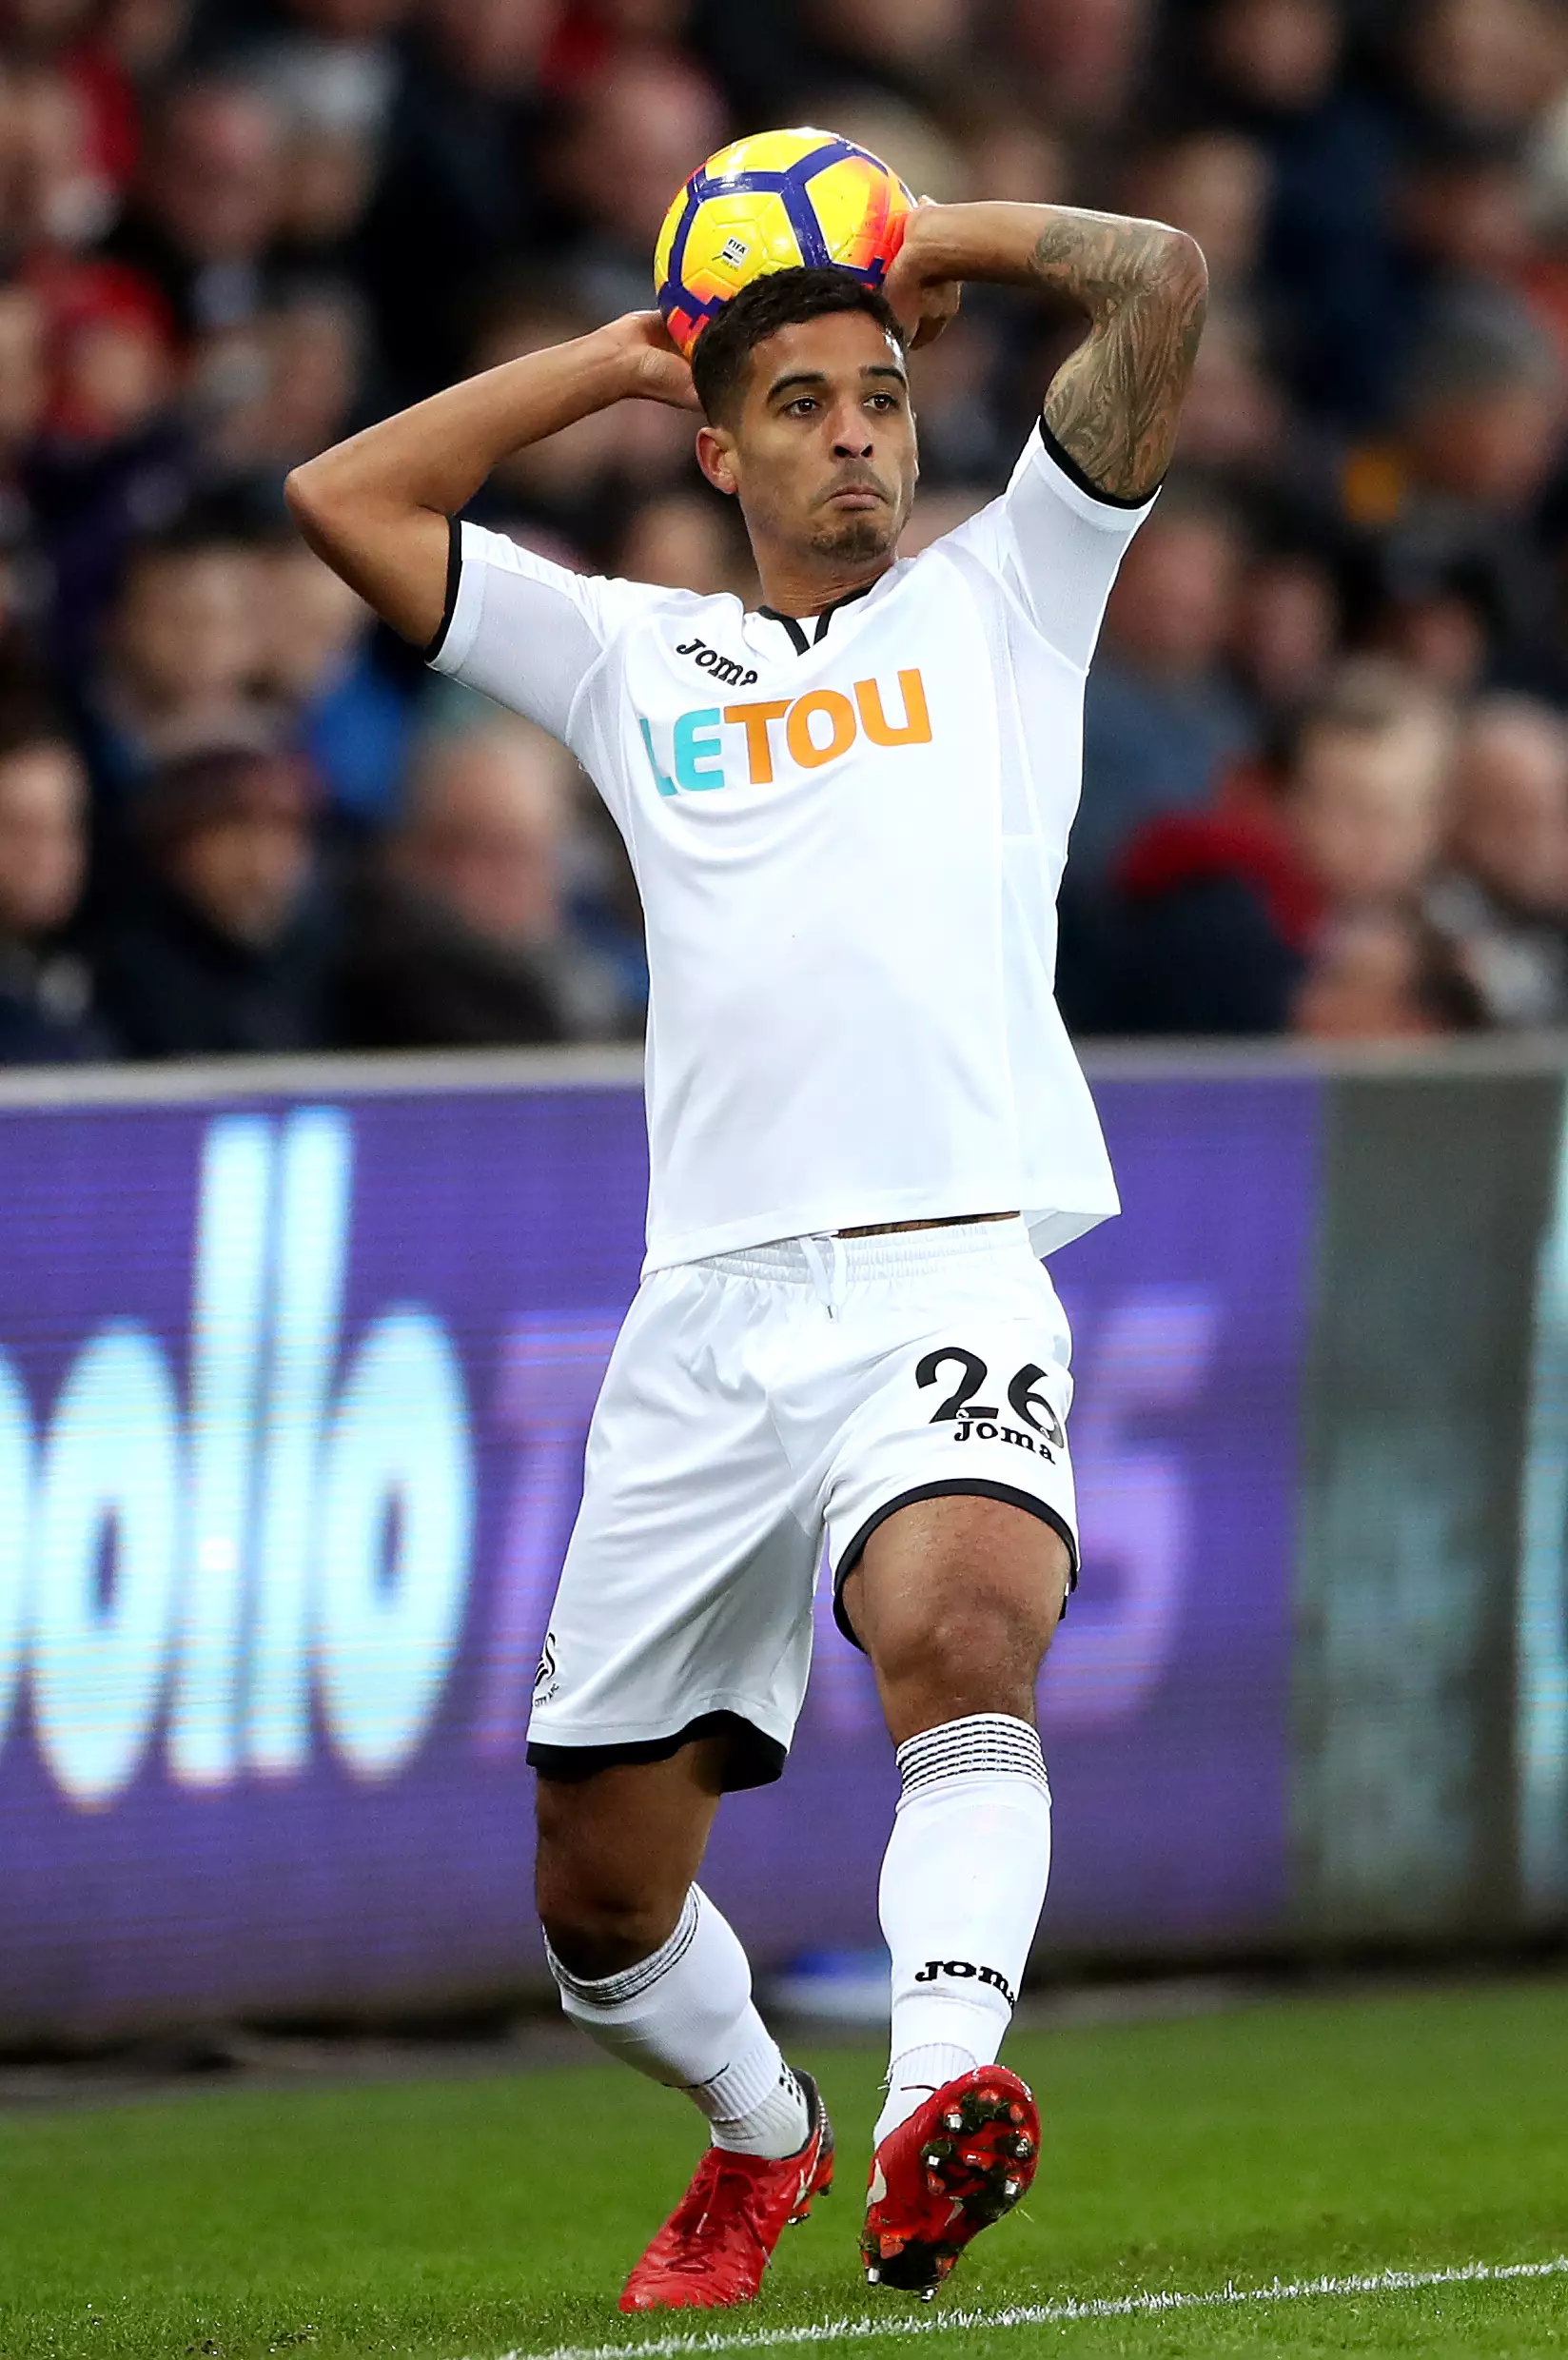 Kyle Naughton takes a throw-in for Swansea City. Image: PA